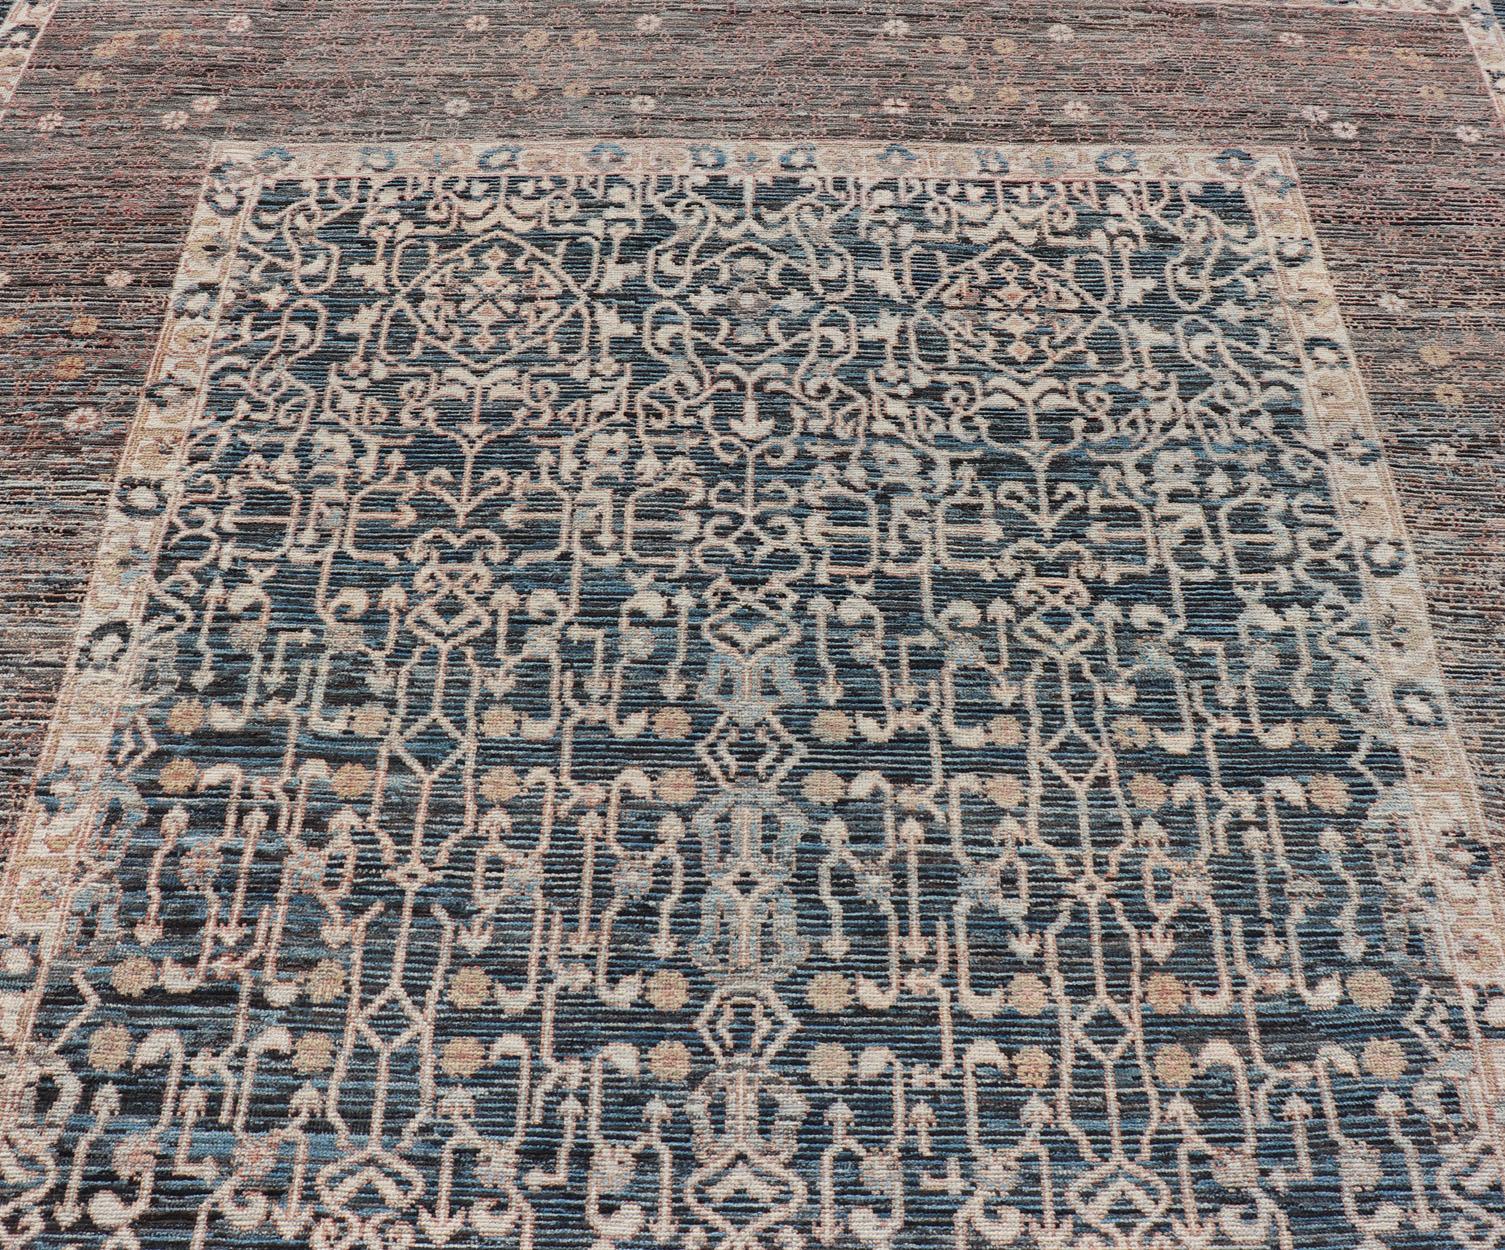 Measures: 9'0 x 12'0
Finely woven Modern rug with intricate all-over Sub-geometric inspired by 13th Century Seljuk Design. Modern Casual Tribal Rug, Keivan Woven Arts / rug AFG-65604, country of origin / type: Afghanistan / Modern Casual, circa